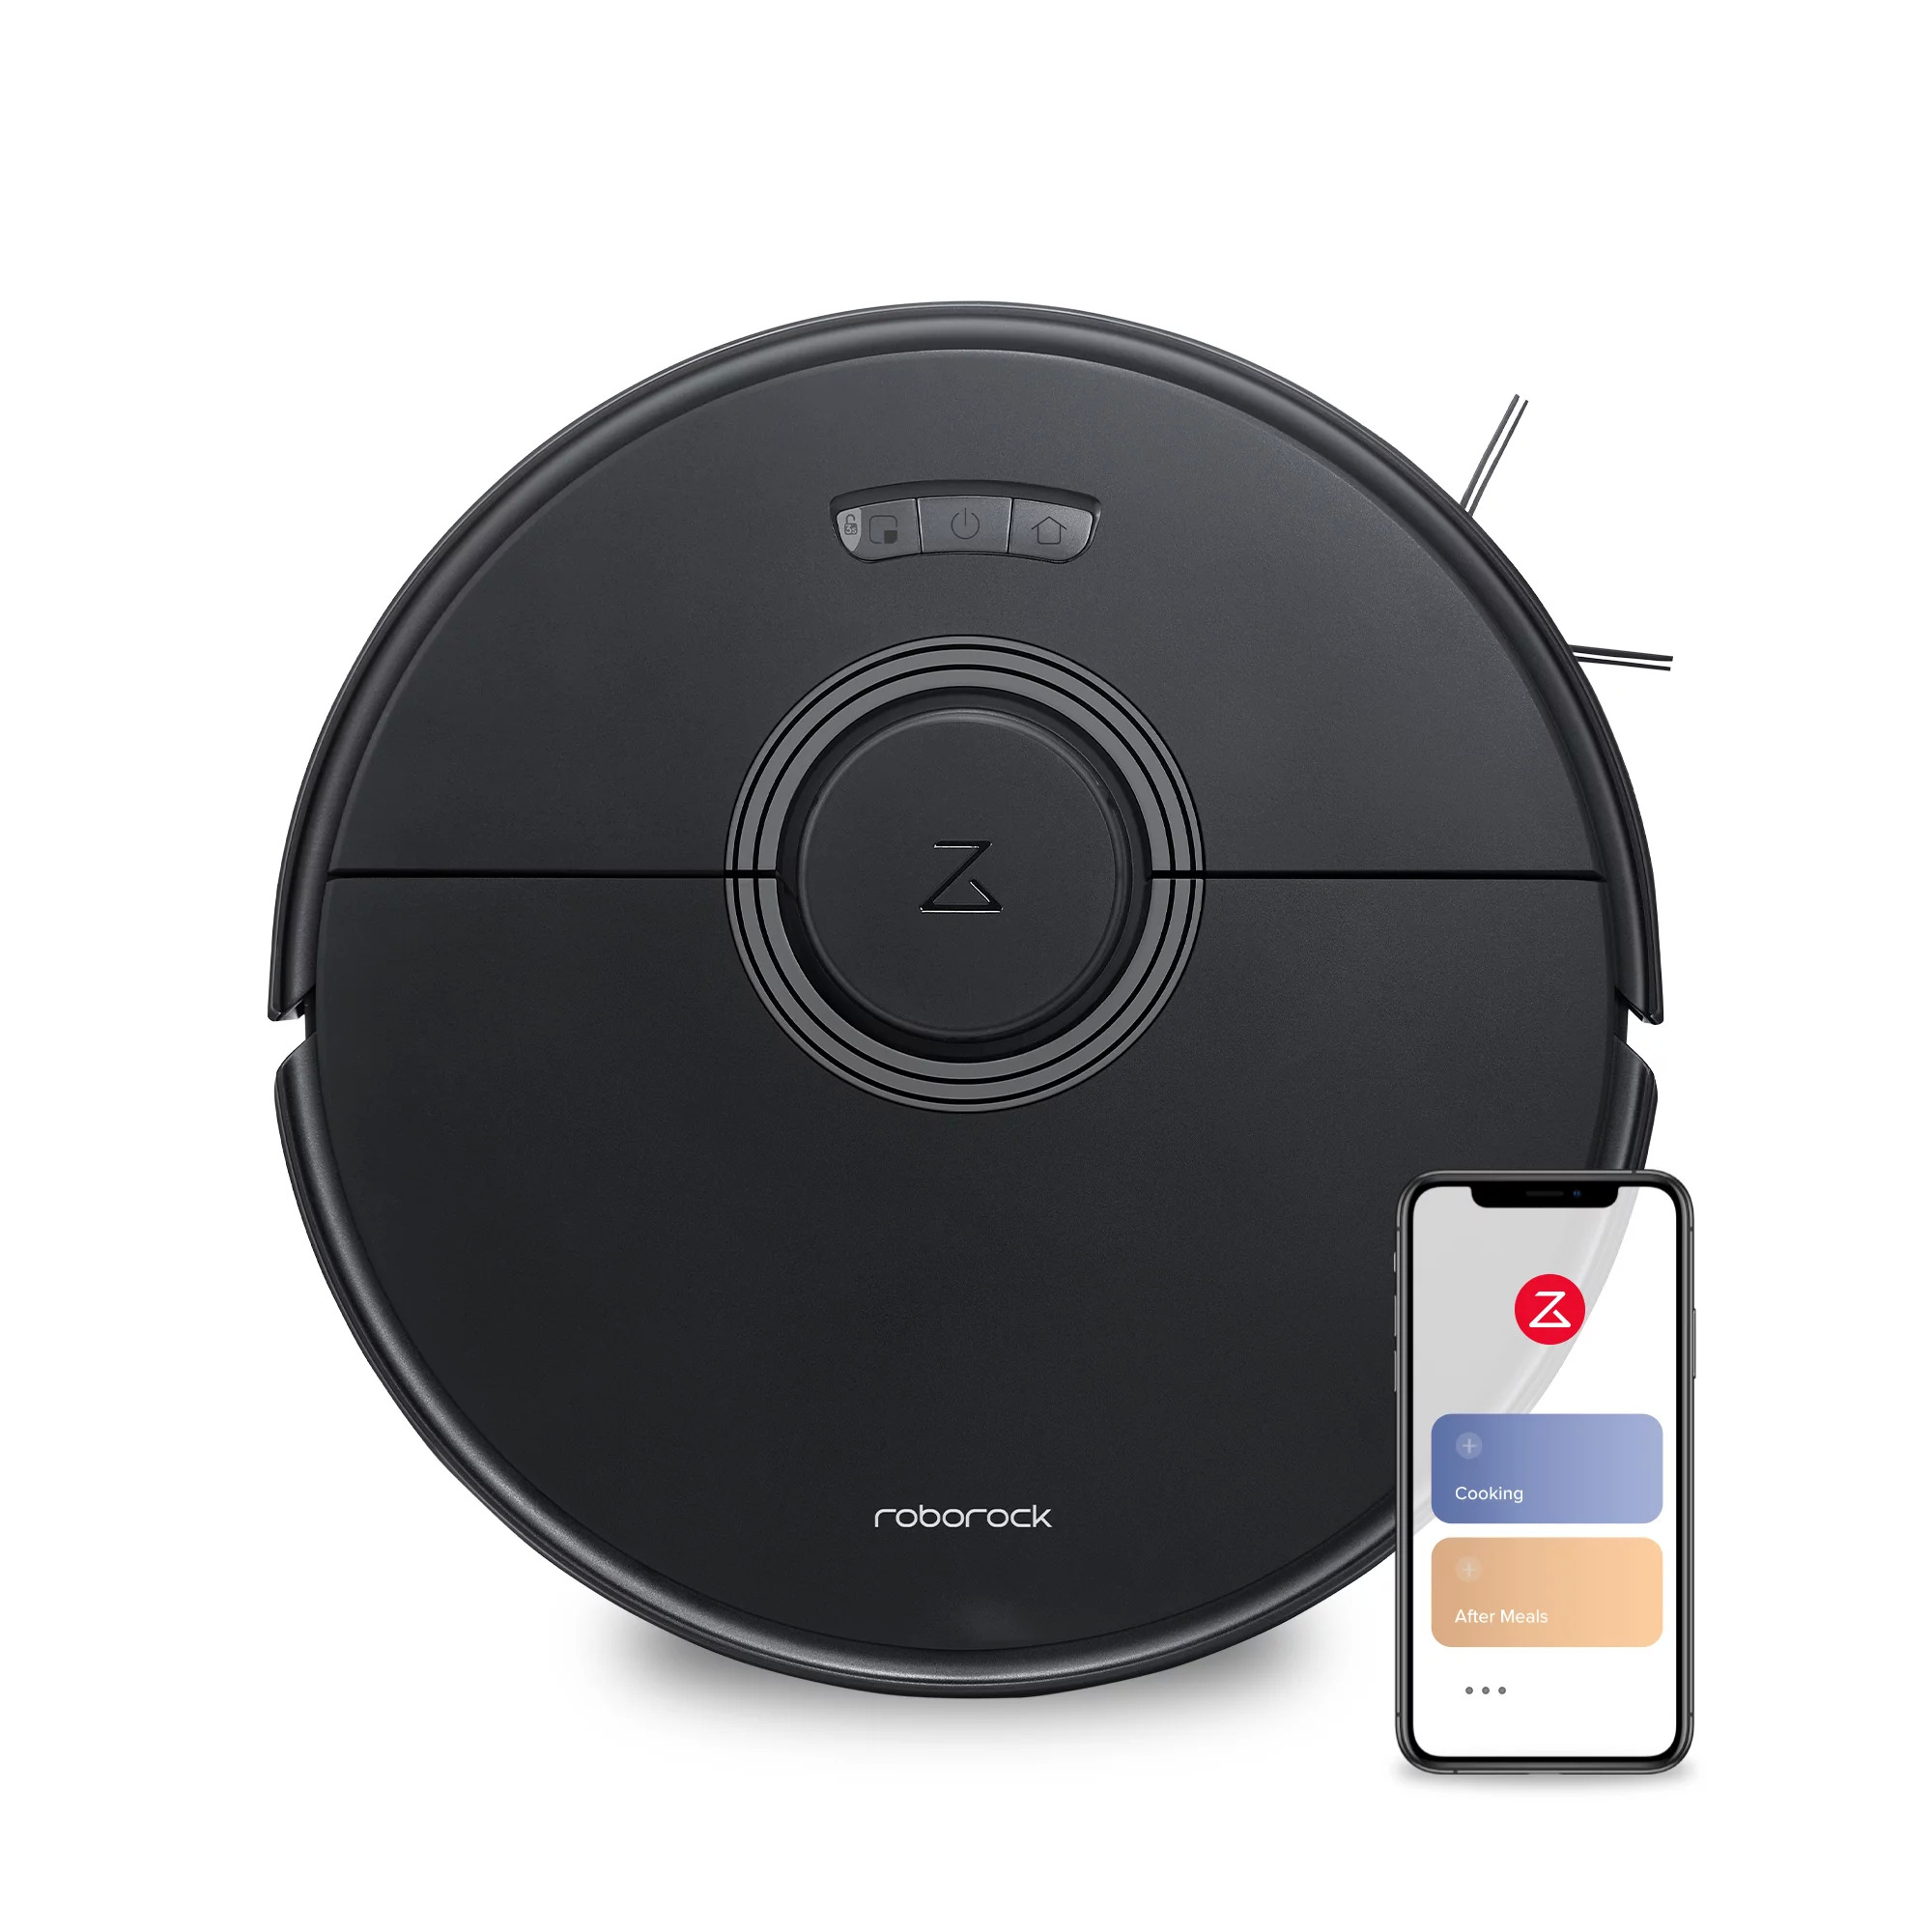 Roborock Q7 Max 4200Pa Robot Vacuum & Mop Cleaner (White or Black) $300 + Free Shipping